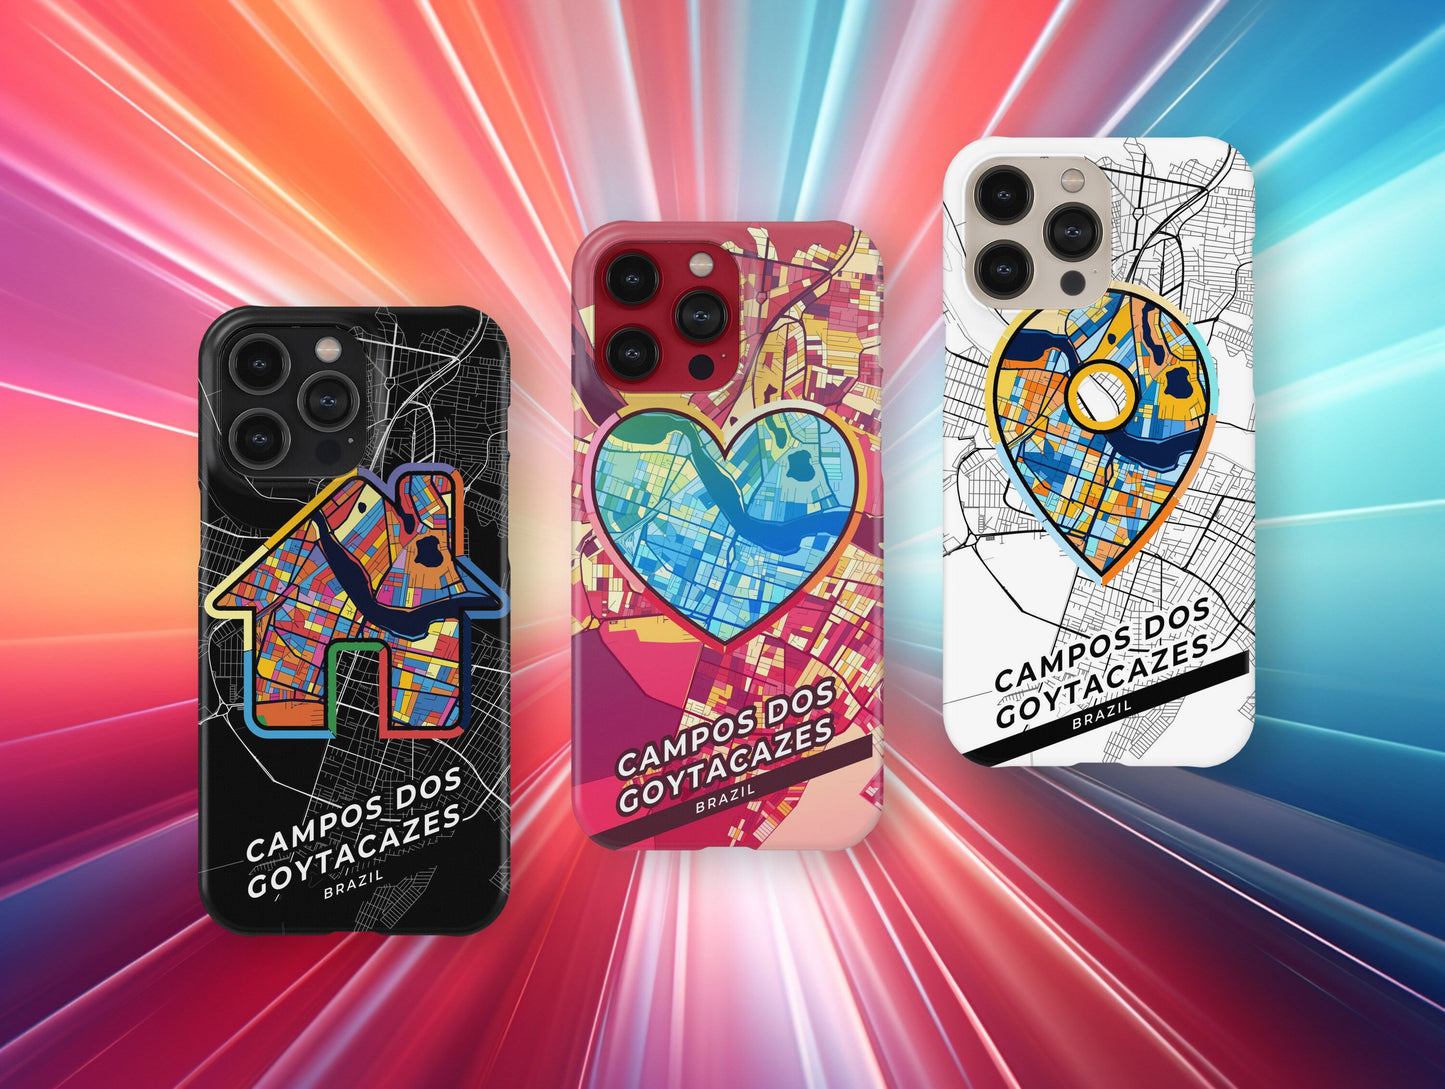 Campos Dos Goytacazes Brazil slim phone case with colorful icon. Birthday, wedding or housewarming gift. Couple match cases.